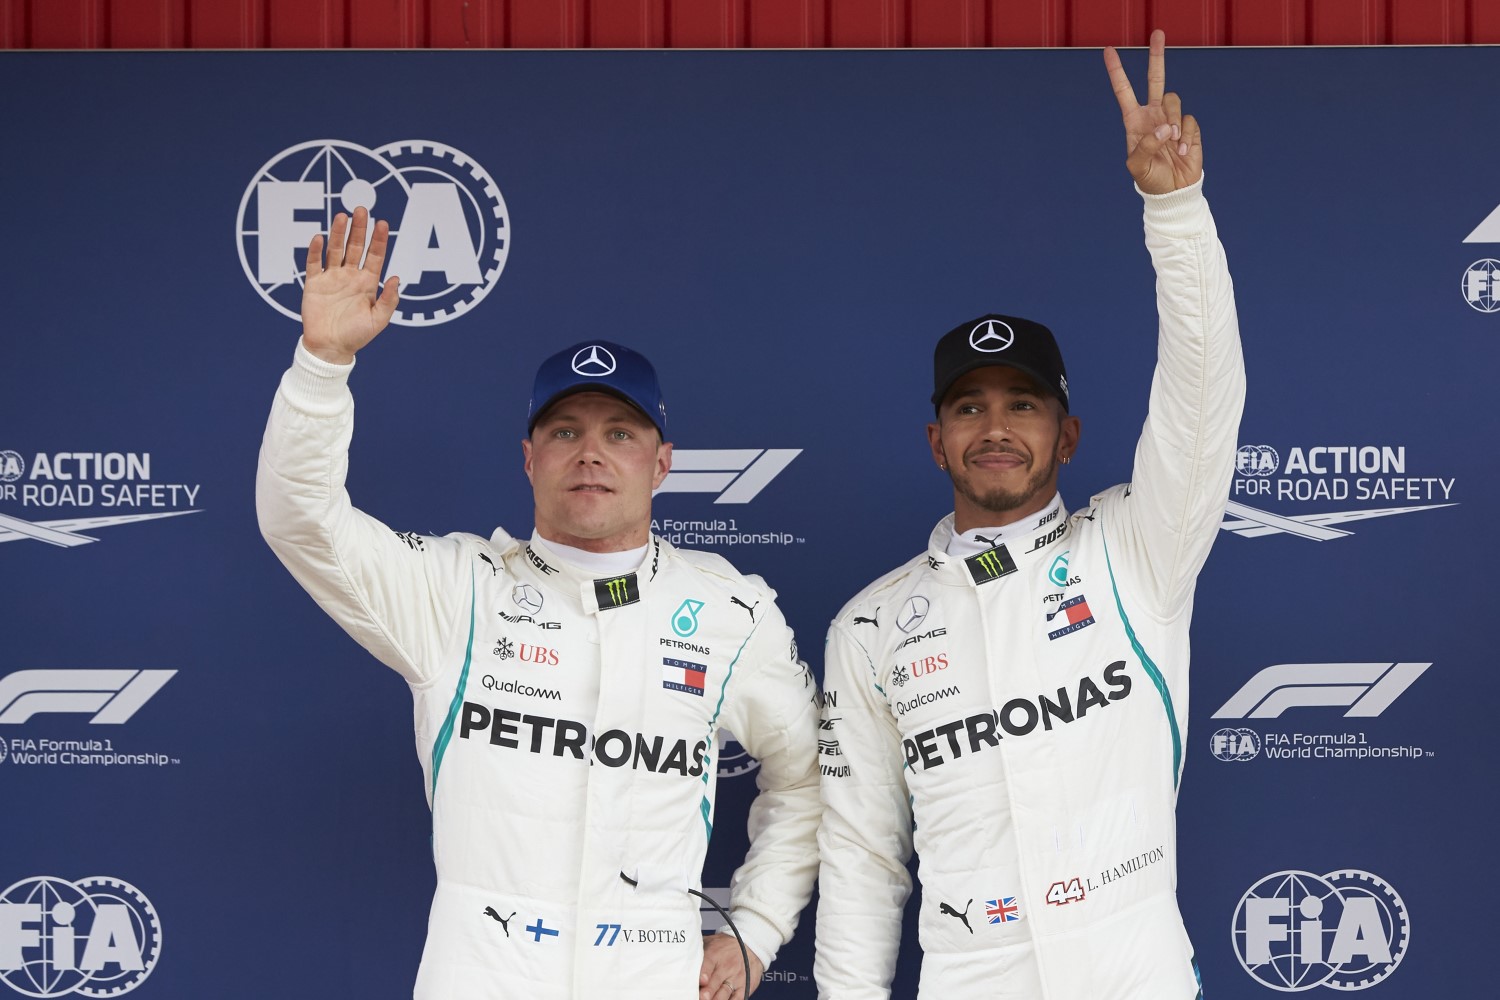 Mercedes will likely retain its two drivers